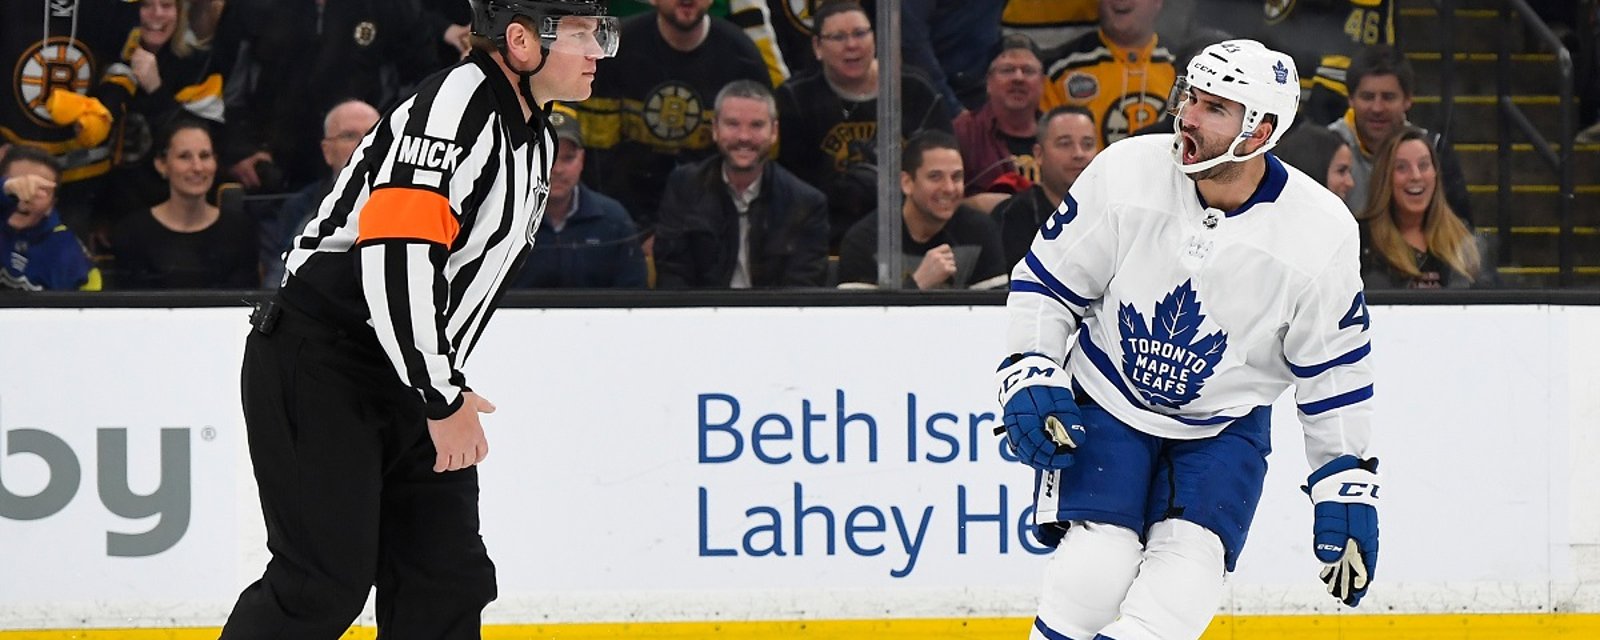 Breaking: The NHL hits Nazem Kadri with a HUGE suspension!